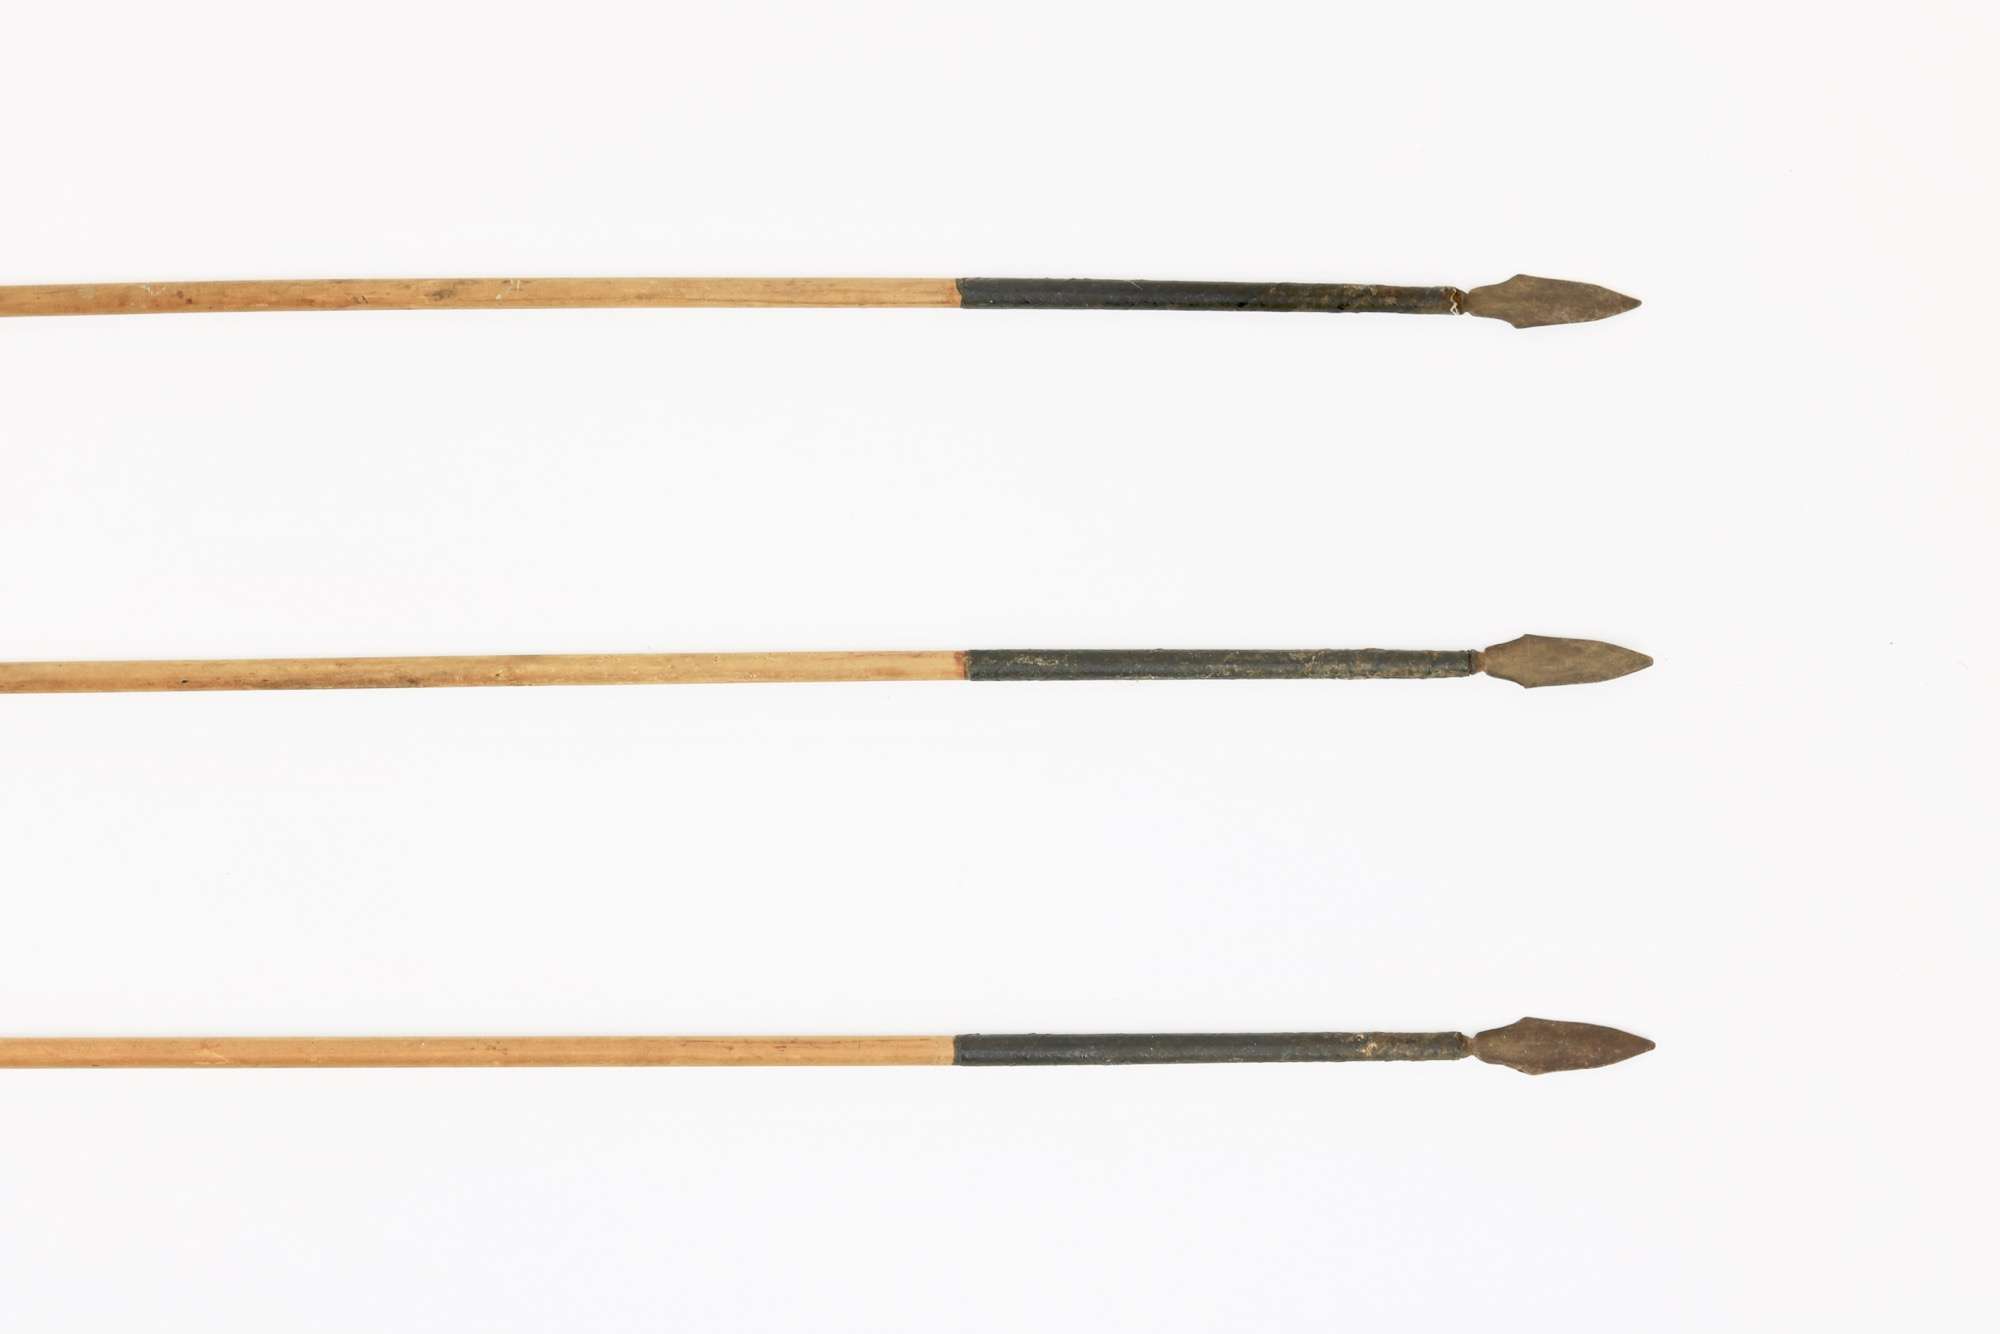 Chinese arrows